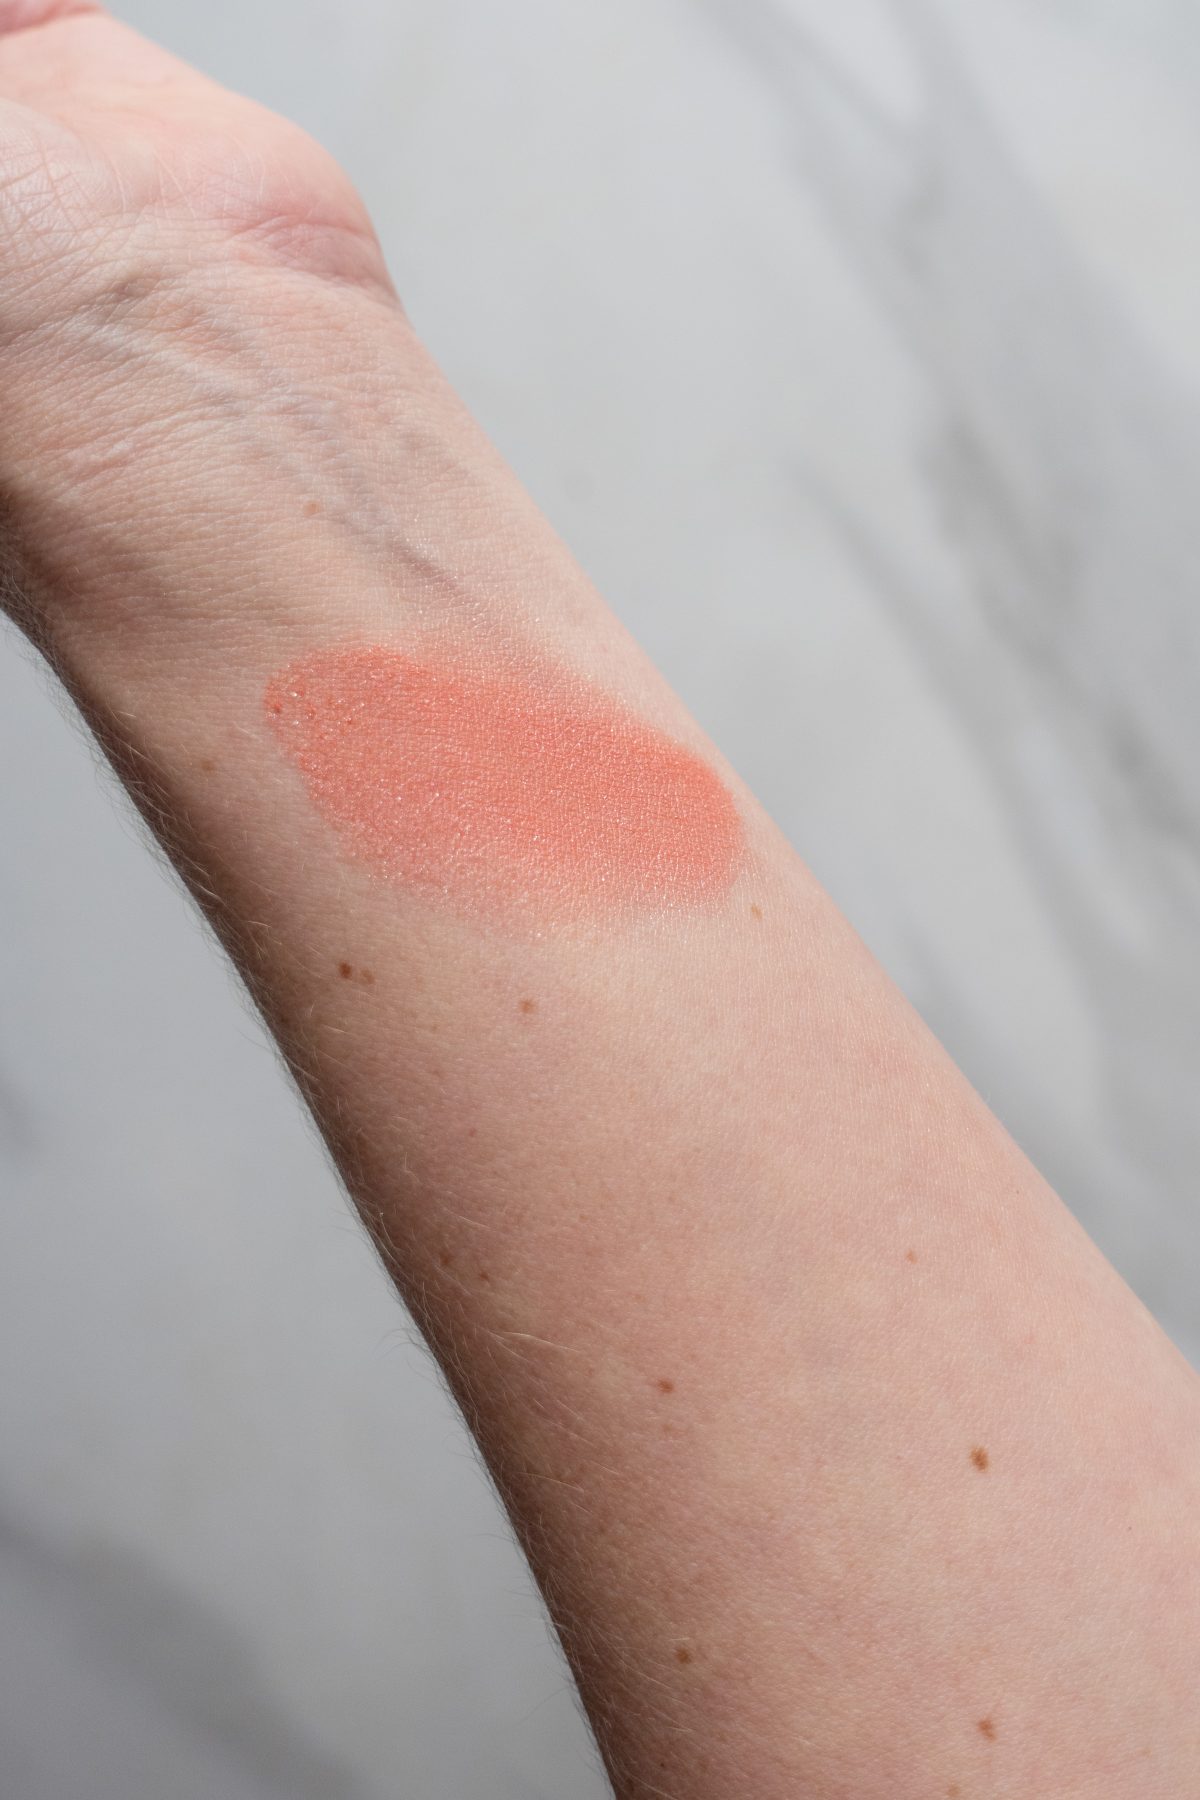 Milani Baked Blush Review and Swatches - Corallina Swatch